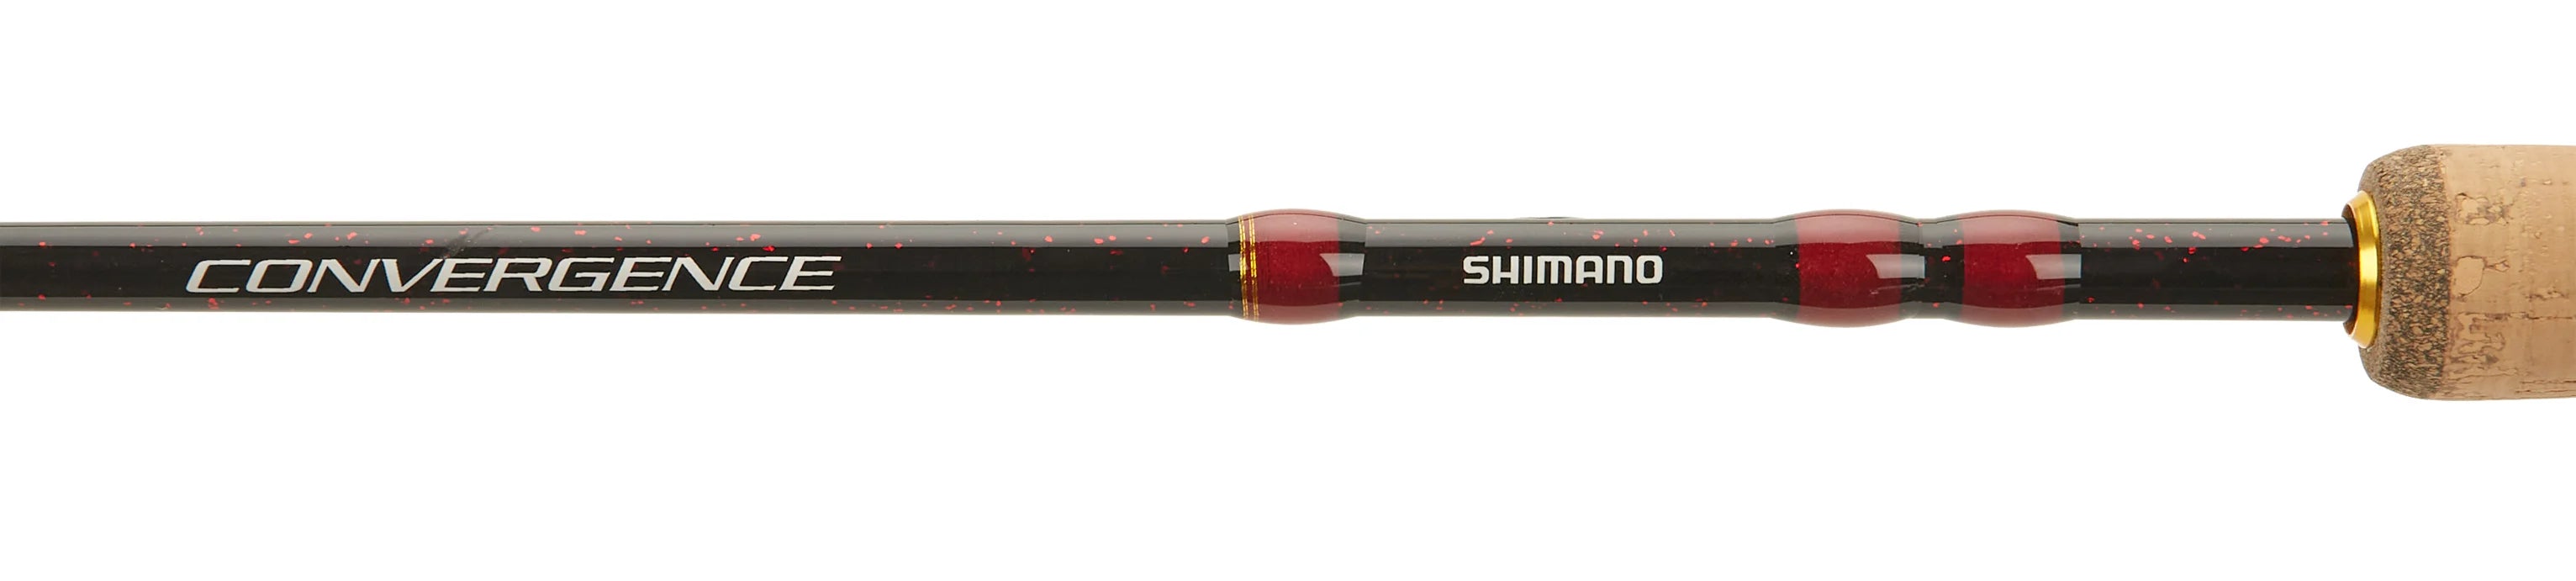 SHIMANO CONVERGENCE D 2-PIECE CASTING RODS - 0